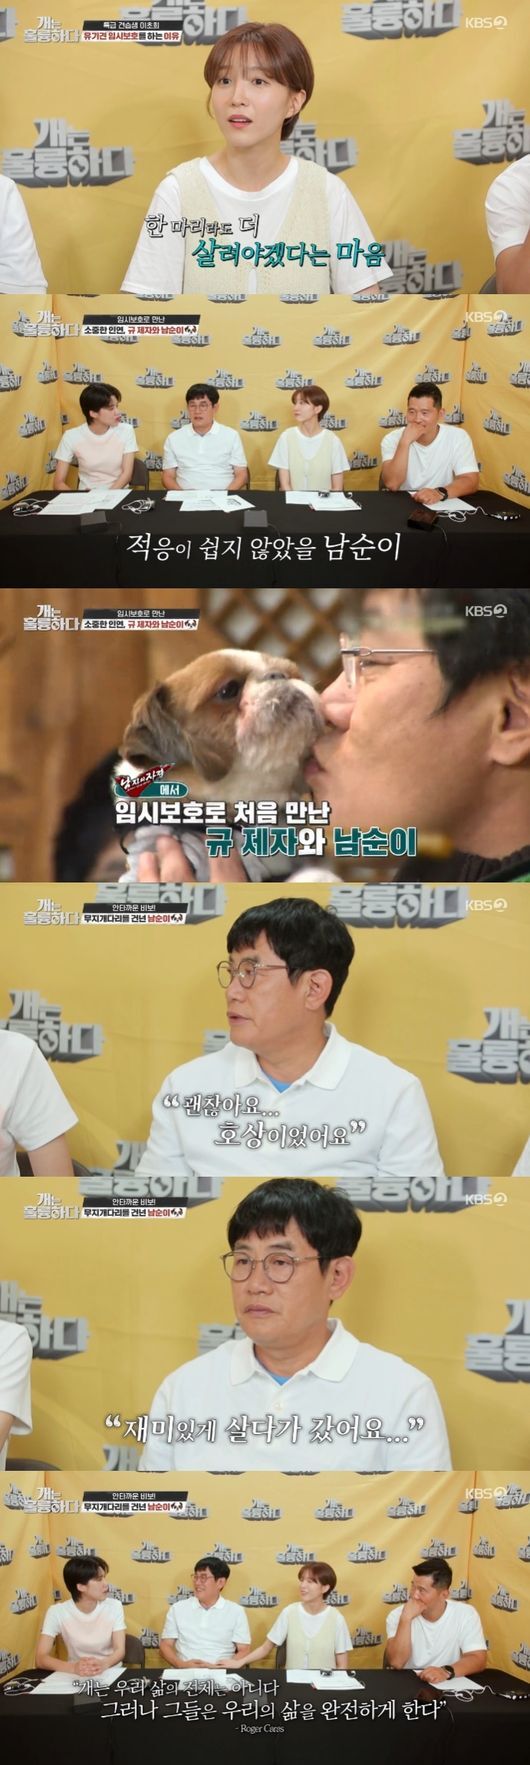 The comedian Lee Kyung-kyu told him how he had left Pet Namsuni, and it was also a pity that he could not keep his beloved family for the broadcast recording.Actor Lee Cho-hee was an apprentice at KBS2 Dogs Are Incredible broadcast on the 29th.Pete Yogo, Lee Cho-hee, who is raising Moji, is engaged in abandoned dog temporary protection.Upon hearing this, Jang Doyeon directed Lee Kyung-kyu, I think youll sympathize a lot; Namsuni also temporarily protected in mans qualification and adopted it.Namsuni also said, It would not have been easy to adapt when I first came to my house.Lee Kyung-kyu said, It was not easy; there were many other dogs, so I was always in the corner. I think it was a trauma while living an abandoned dog.In particular, Jang Doyeon attracted attention by mentioning the news of Namsuni, who died last week, saying, Namsuni crossed the rainbow bridge...Earlier, Gaohulung had previously delivered a bib of Namsuni through a pre-release video: a week ago, during the recording of Gahulung, a call came in saying that Namsuni had left the rainbow bridge.Lee Kyung-kyu, who returned from the phone, said, Namsuni went to heaven? But he was sad because he could not hide his complicated mind.After leaving Namsuni, Lee Kyung-kyu said: Its OK, because it was a hoax.I wrapped it up with love and raised it, so it goes well with the dogs and it goes well with the live ... it was fun to live ... I went. He was the main MC who had to keep the scene, so he could not keep his personal family history.The fact that he could not keep the end of his beloved family who had been together for 10 years made him feel even the hearts of those who watched.I felt the weight of The Godfather, who had to choose broadcasting rather than personal history.KBS2